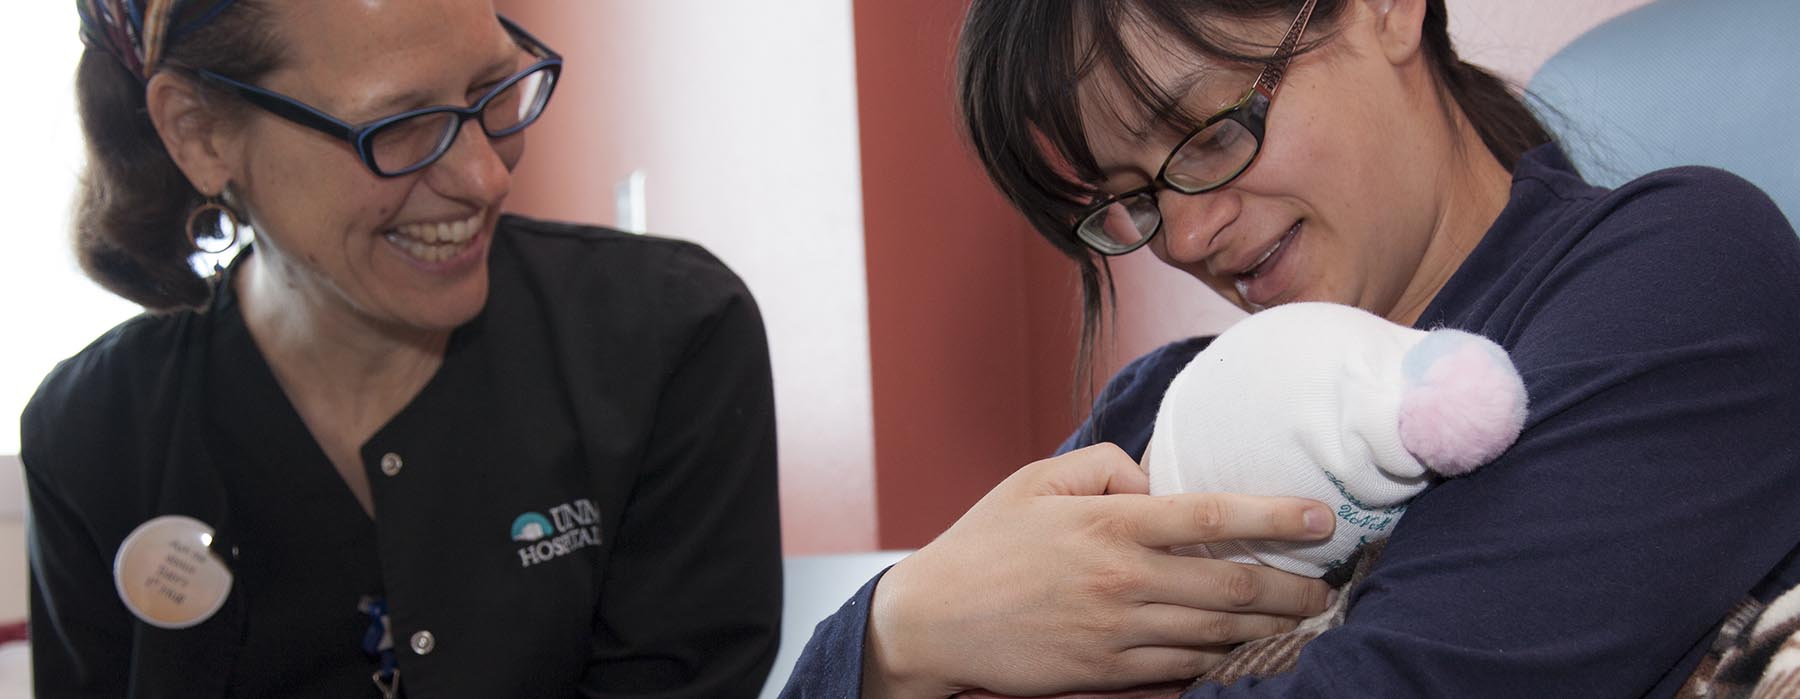 A UNM provider helping a mother breastfeed